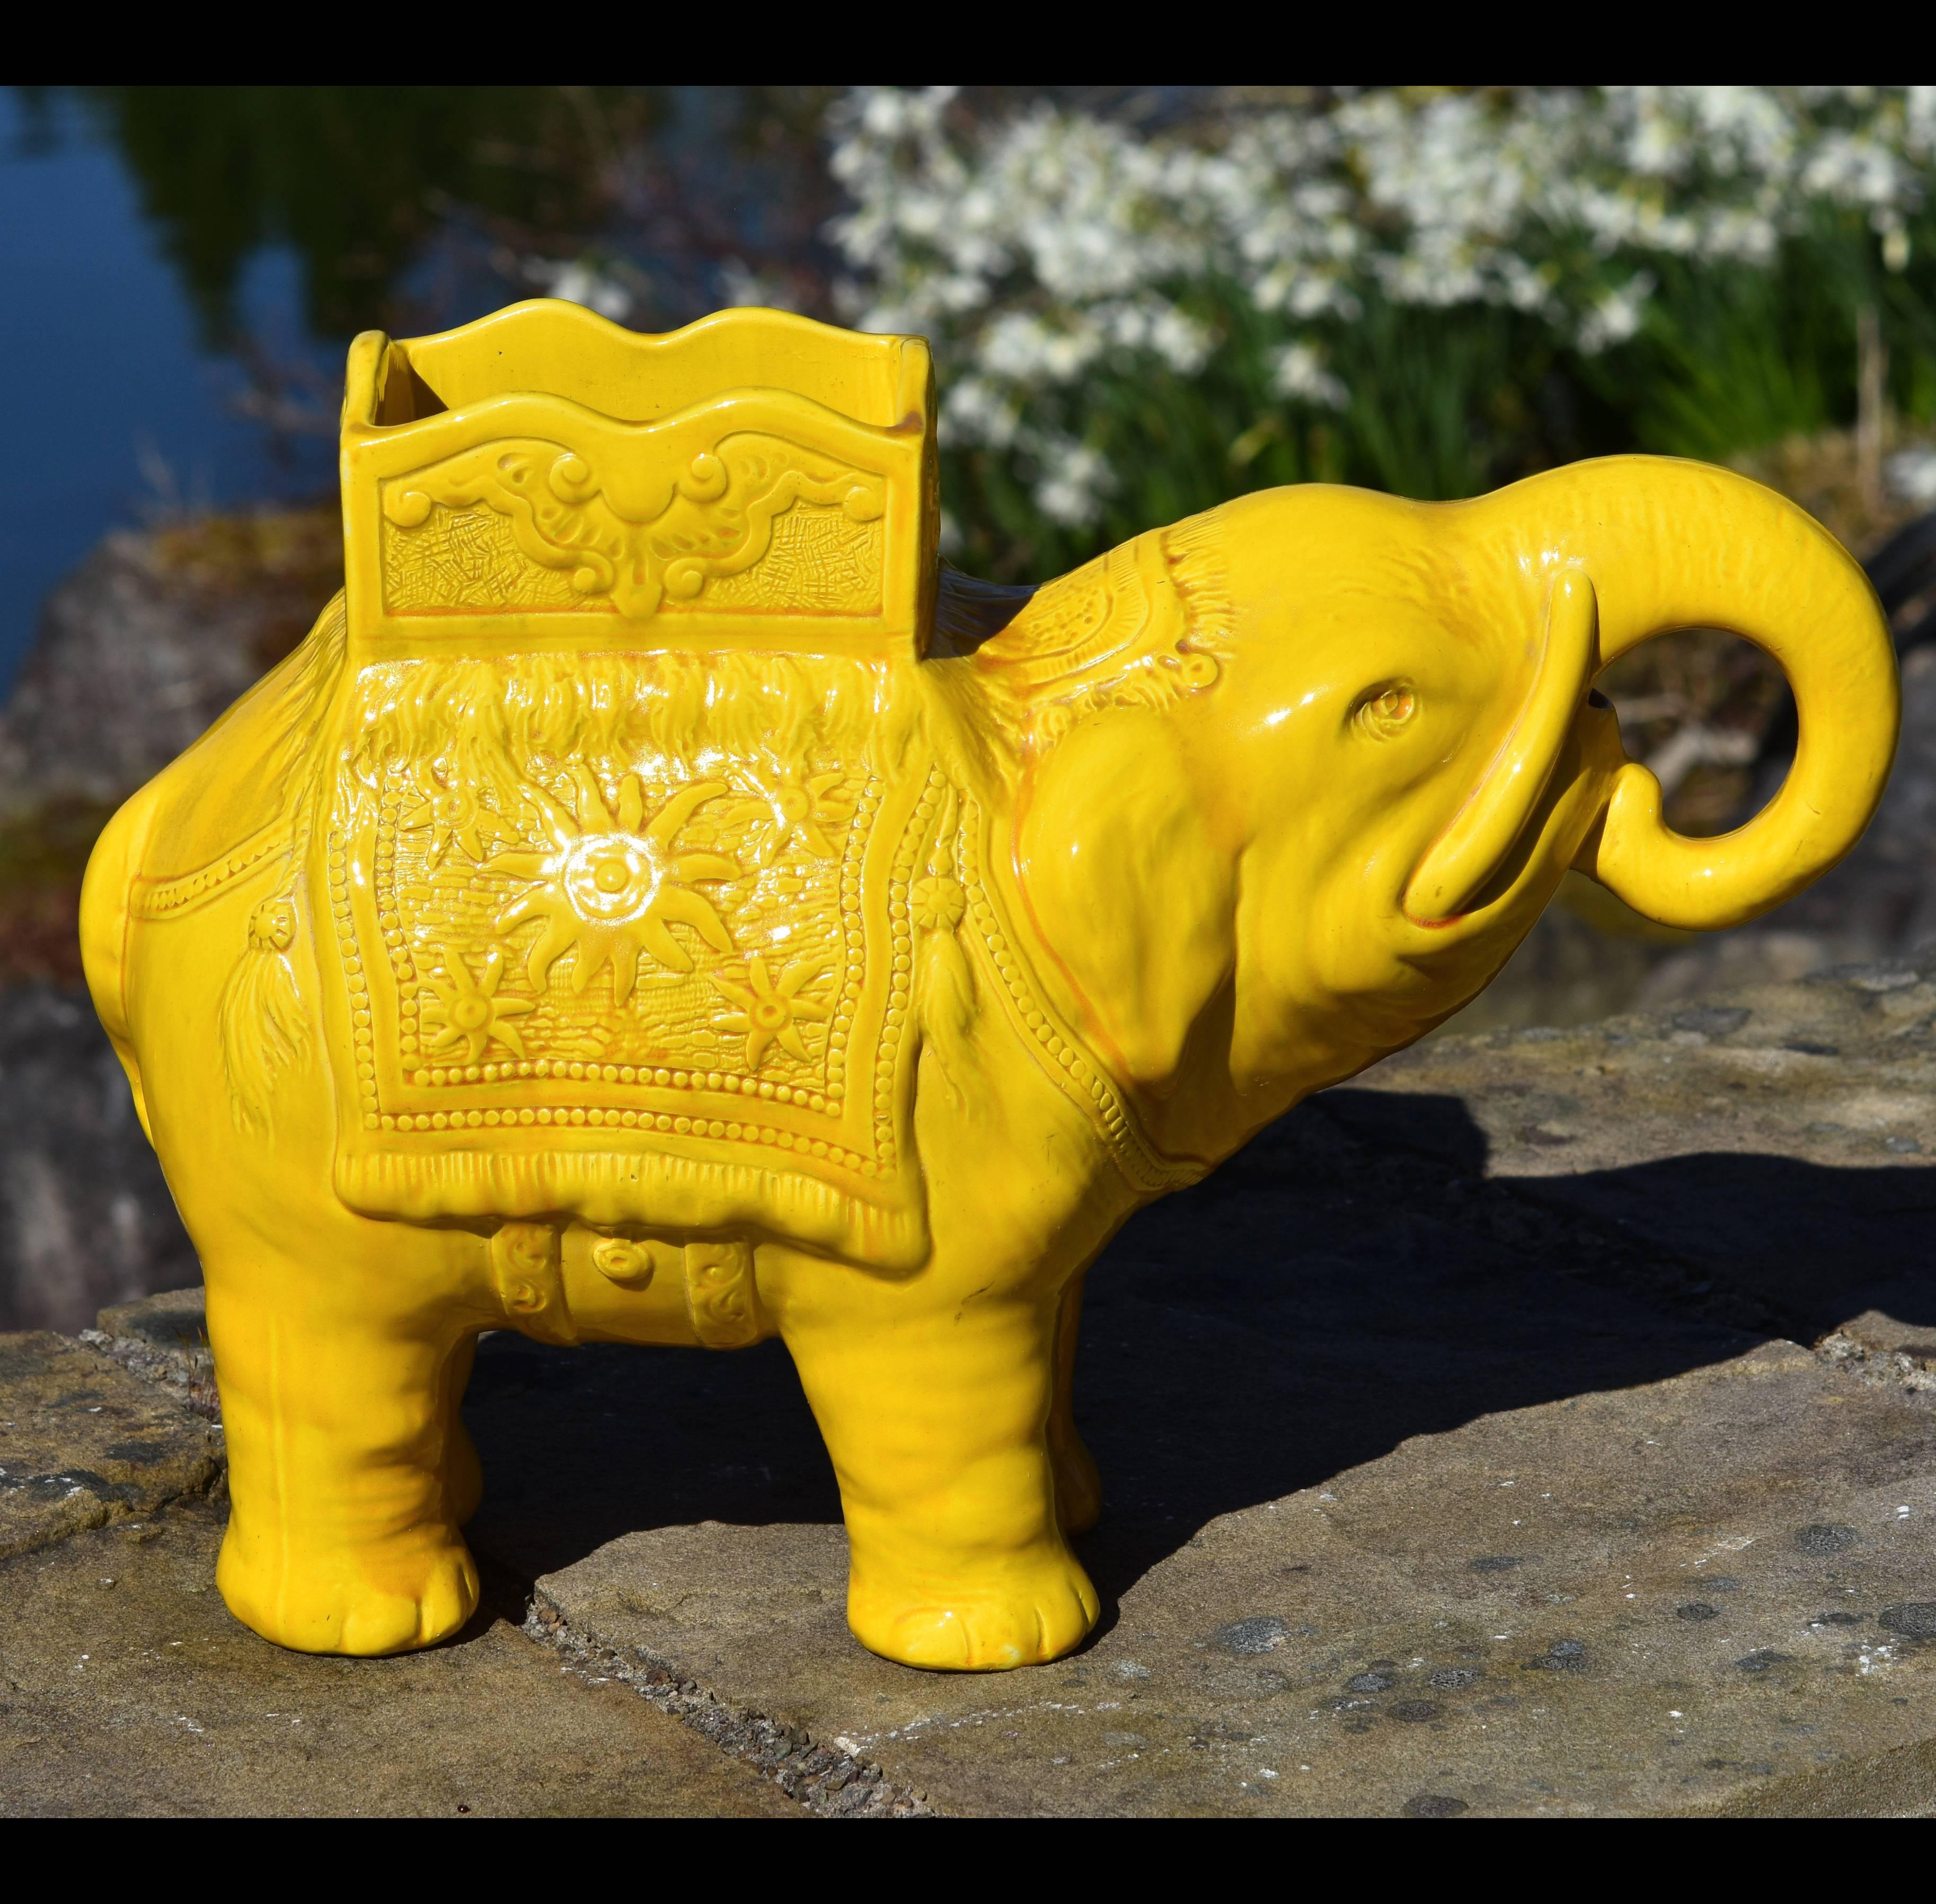 19th Century Yellow Elephant Jardiniere Vase Ault Arts & Crafts In Excellent Condition In London, United Kindgom